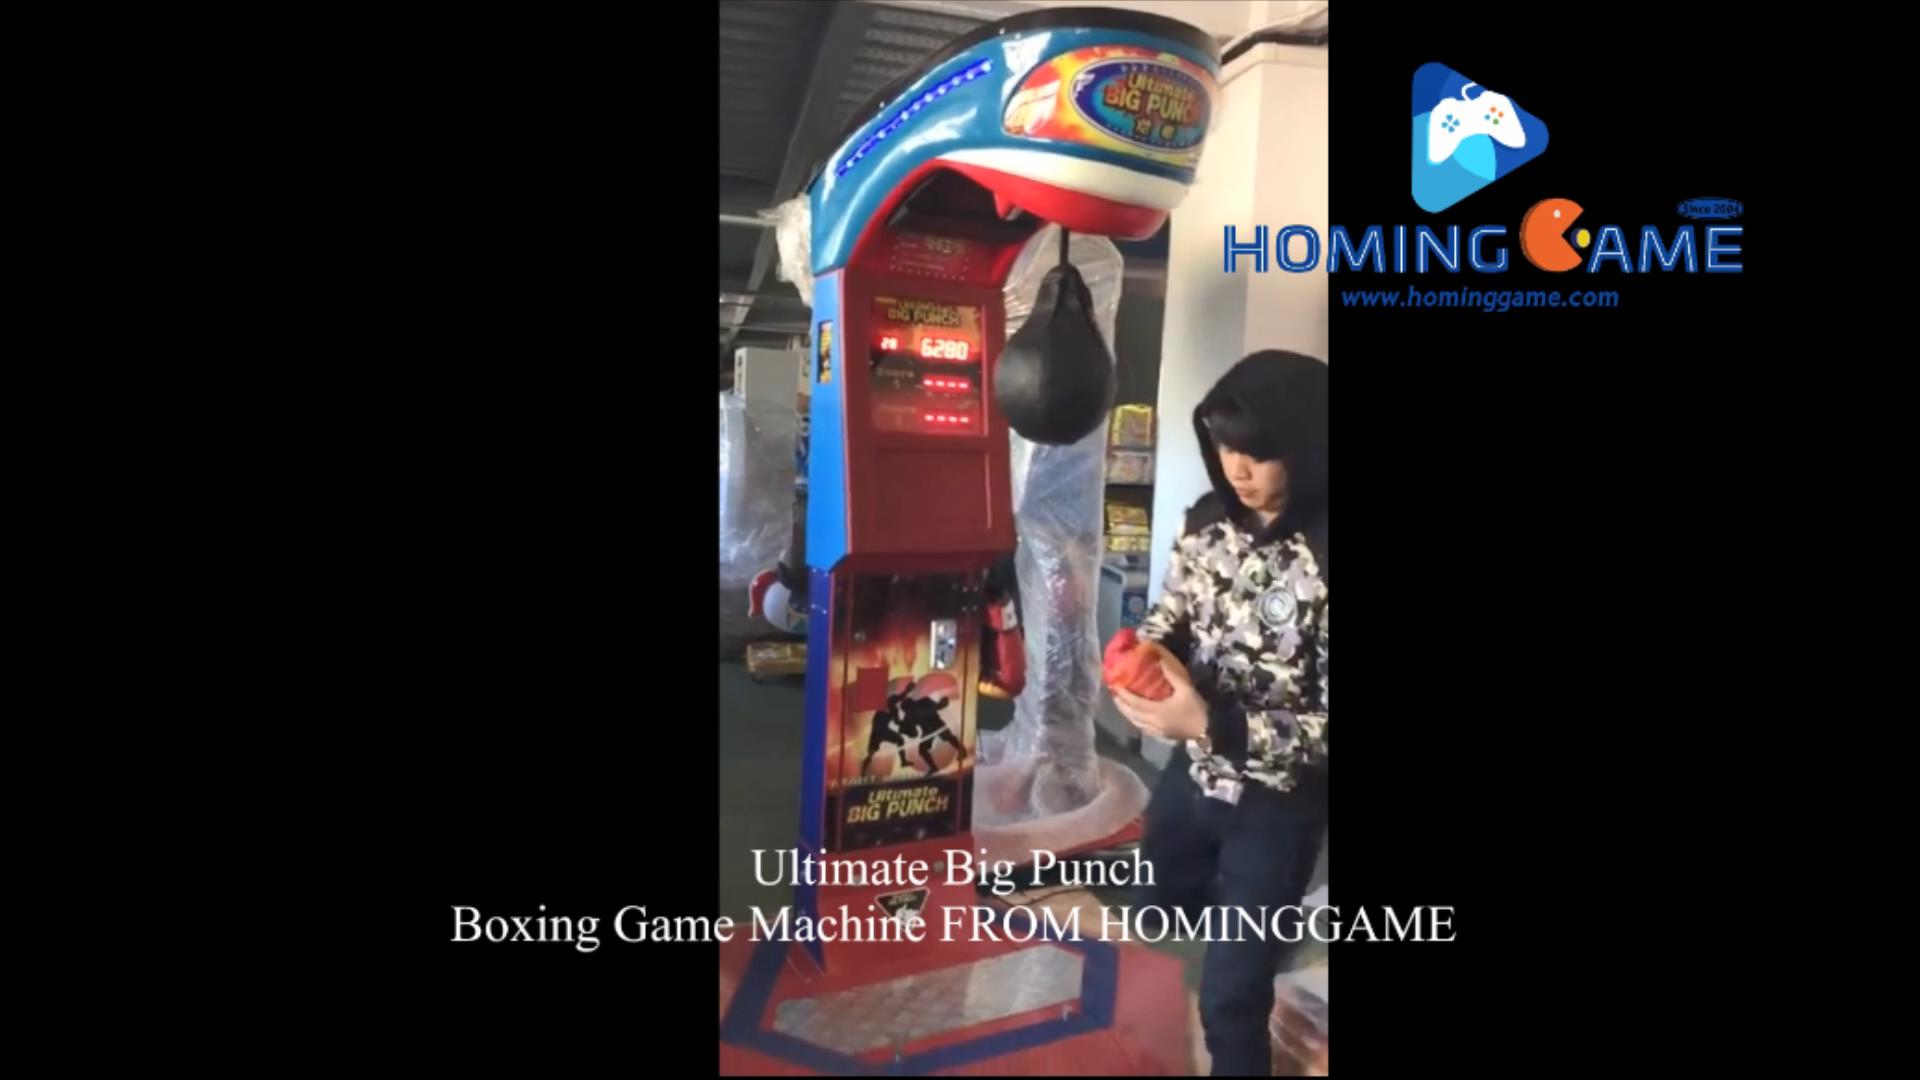 ultimate big punch boxing arcade game machine,ultimate big punch boxing game machine,boxing game machine,boxing arcade game machine,ultimate big punch game machine,boxing machine,boxing game,boxing arcade game,boxing redemption game machine,lutiamte big punch payout cocola prize game machine,boxing prize game machine,game machine,arcade game machine,coin operated game machine,indoor game machine,electrical game machine,amusement park game equipment,game equipment,amusement machine,entertainment game machine,family entertainment game machine,sports game,sports game machine,redemption game machine,lottery game machine,prize game machine,boxing arcade,hominggame,www.gametube.hk,hominggame game machine,hominggame boxing machine,ultimate big punch boxing arcade game